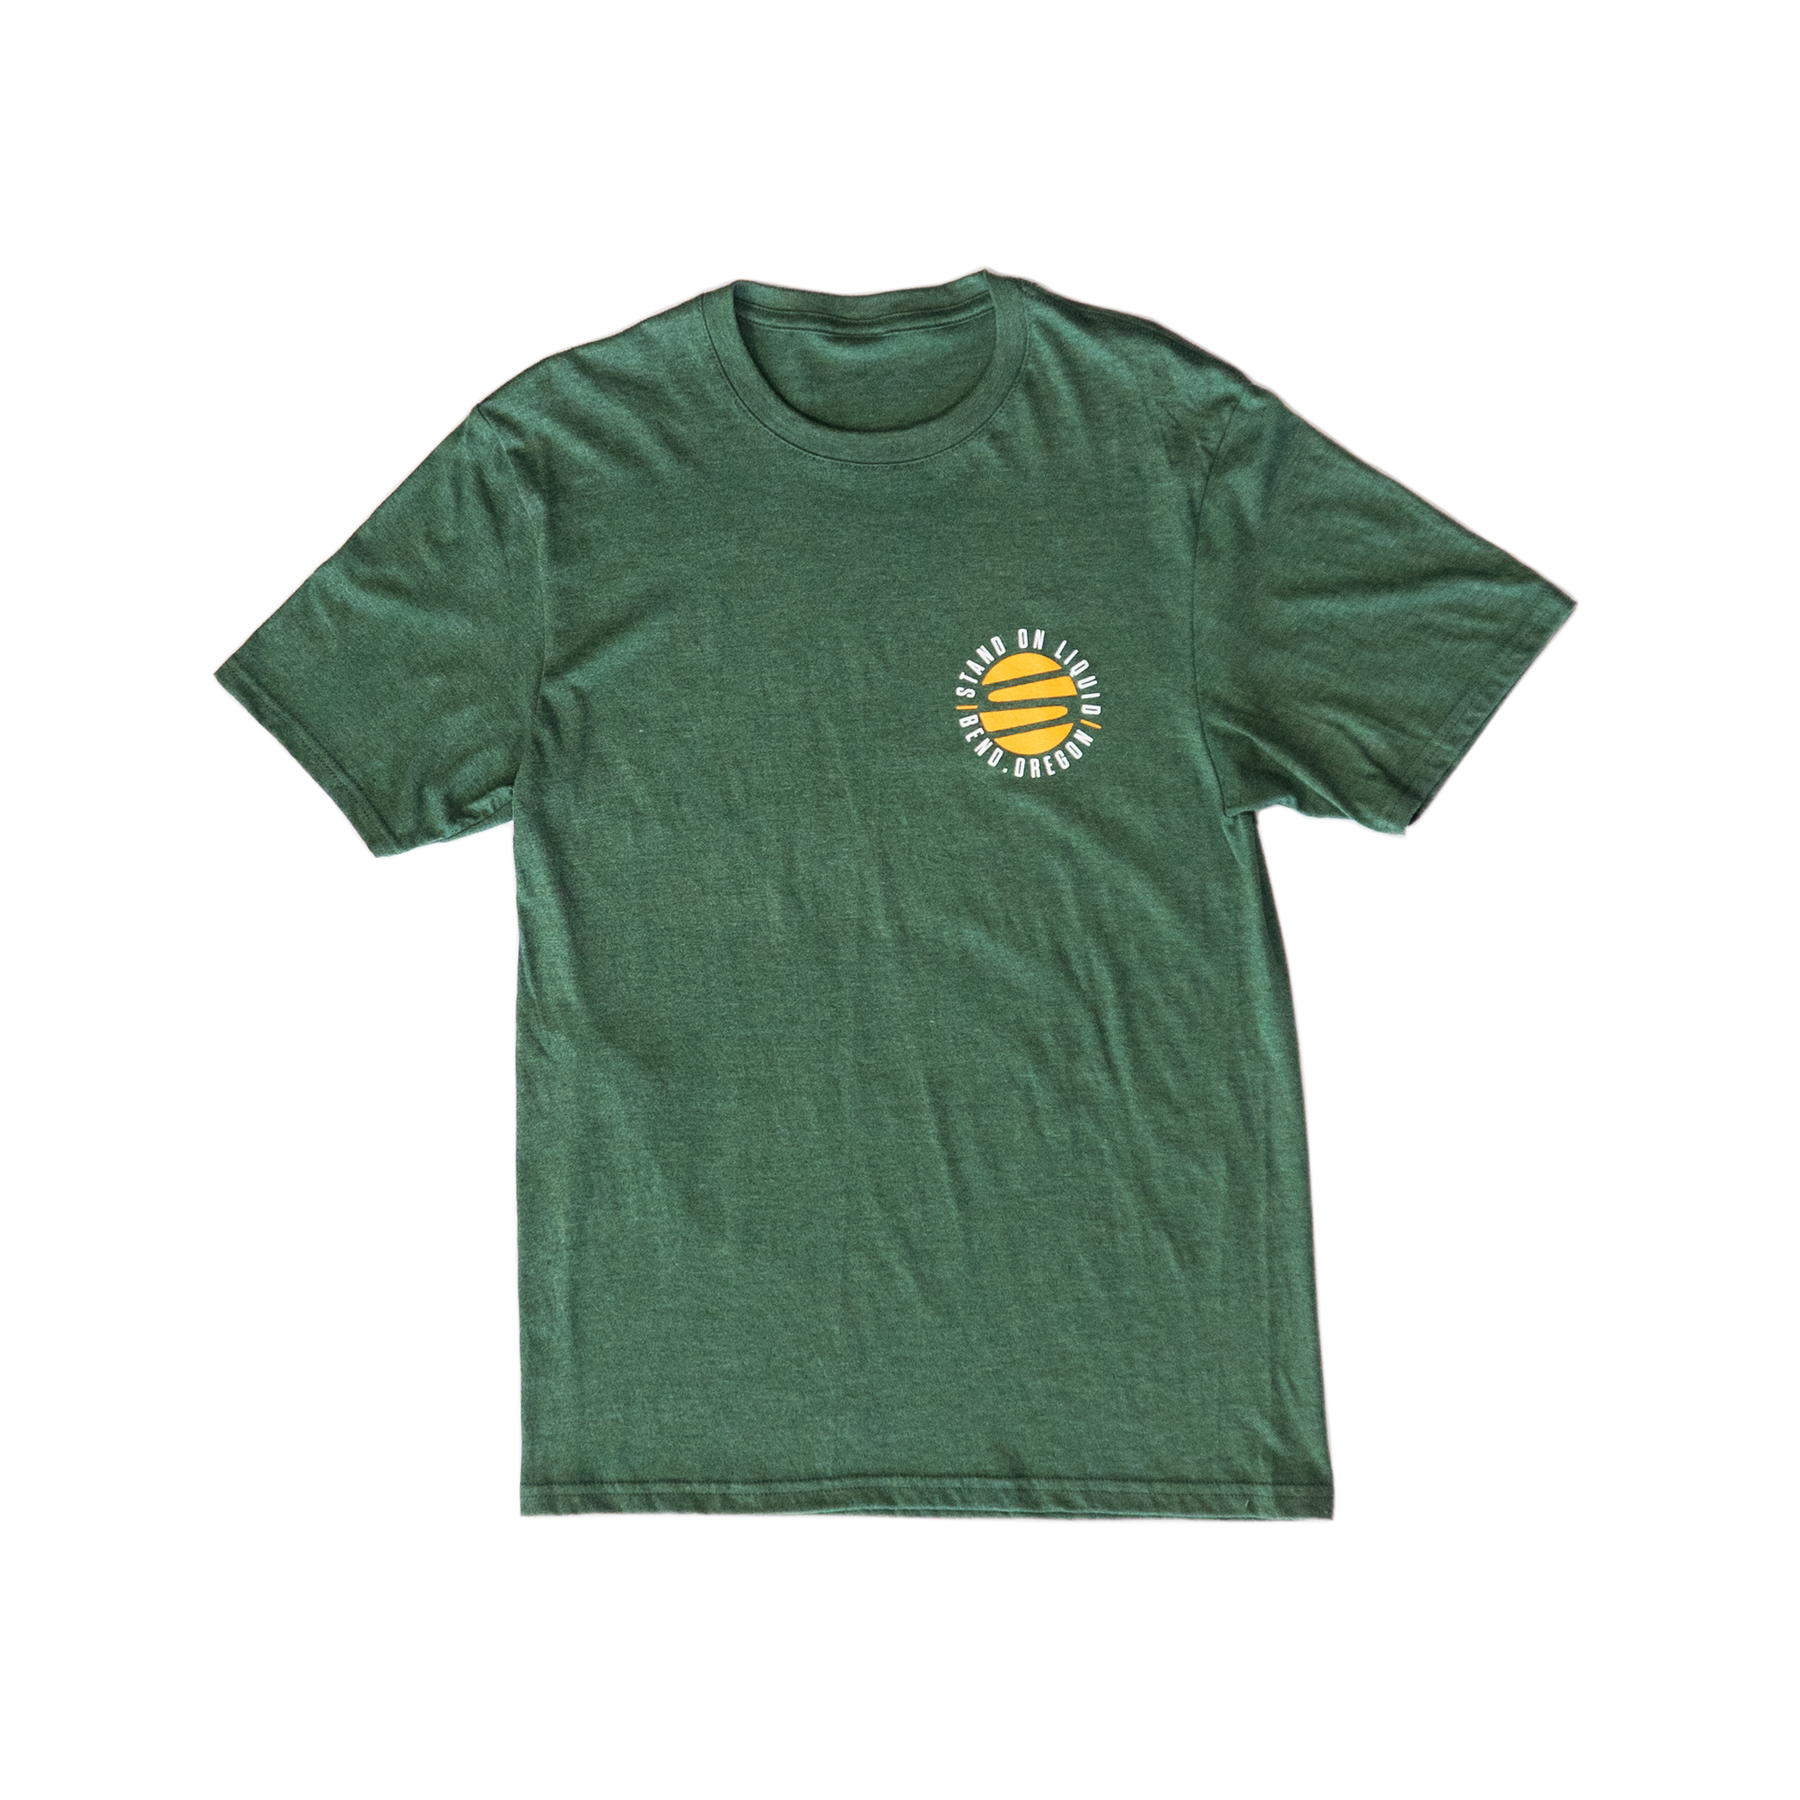 Stand on Liquid Forest Green Tee